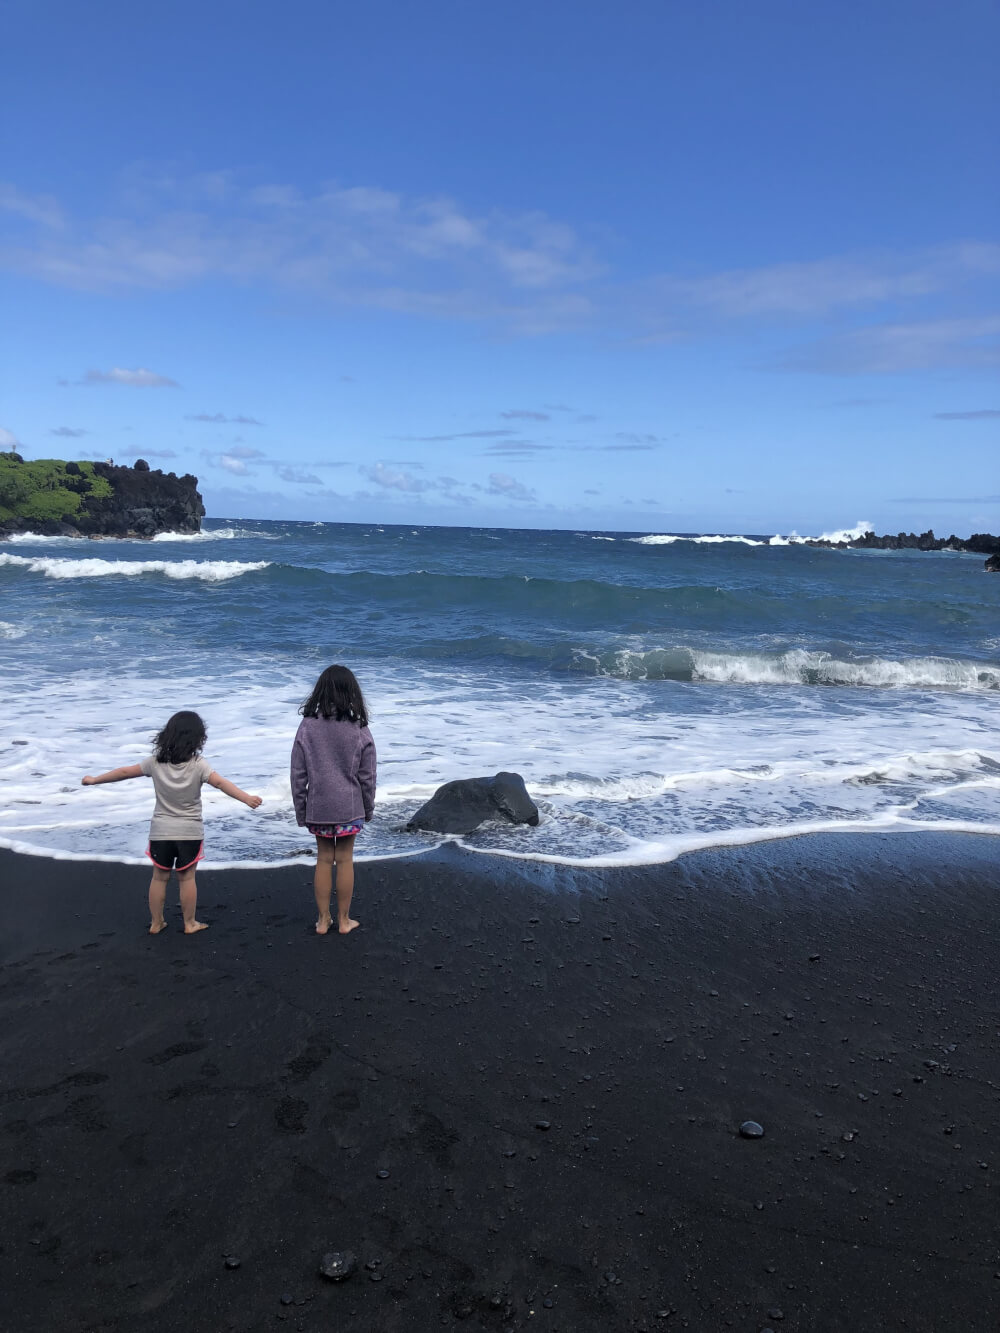 3 Day Maui Itinerary with Kids featured by top Hawaii travel blog, Hawaii Travel with Kids: Black Sand Beach, Wai’anapanapa State Park, Maui is great stop on the Road to Hana on Maui with kids